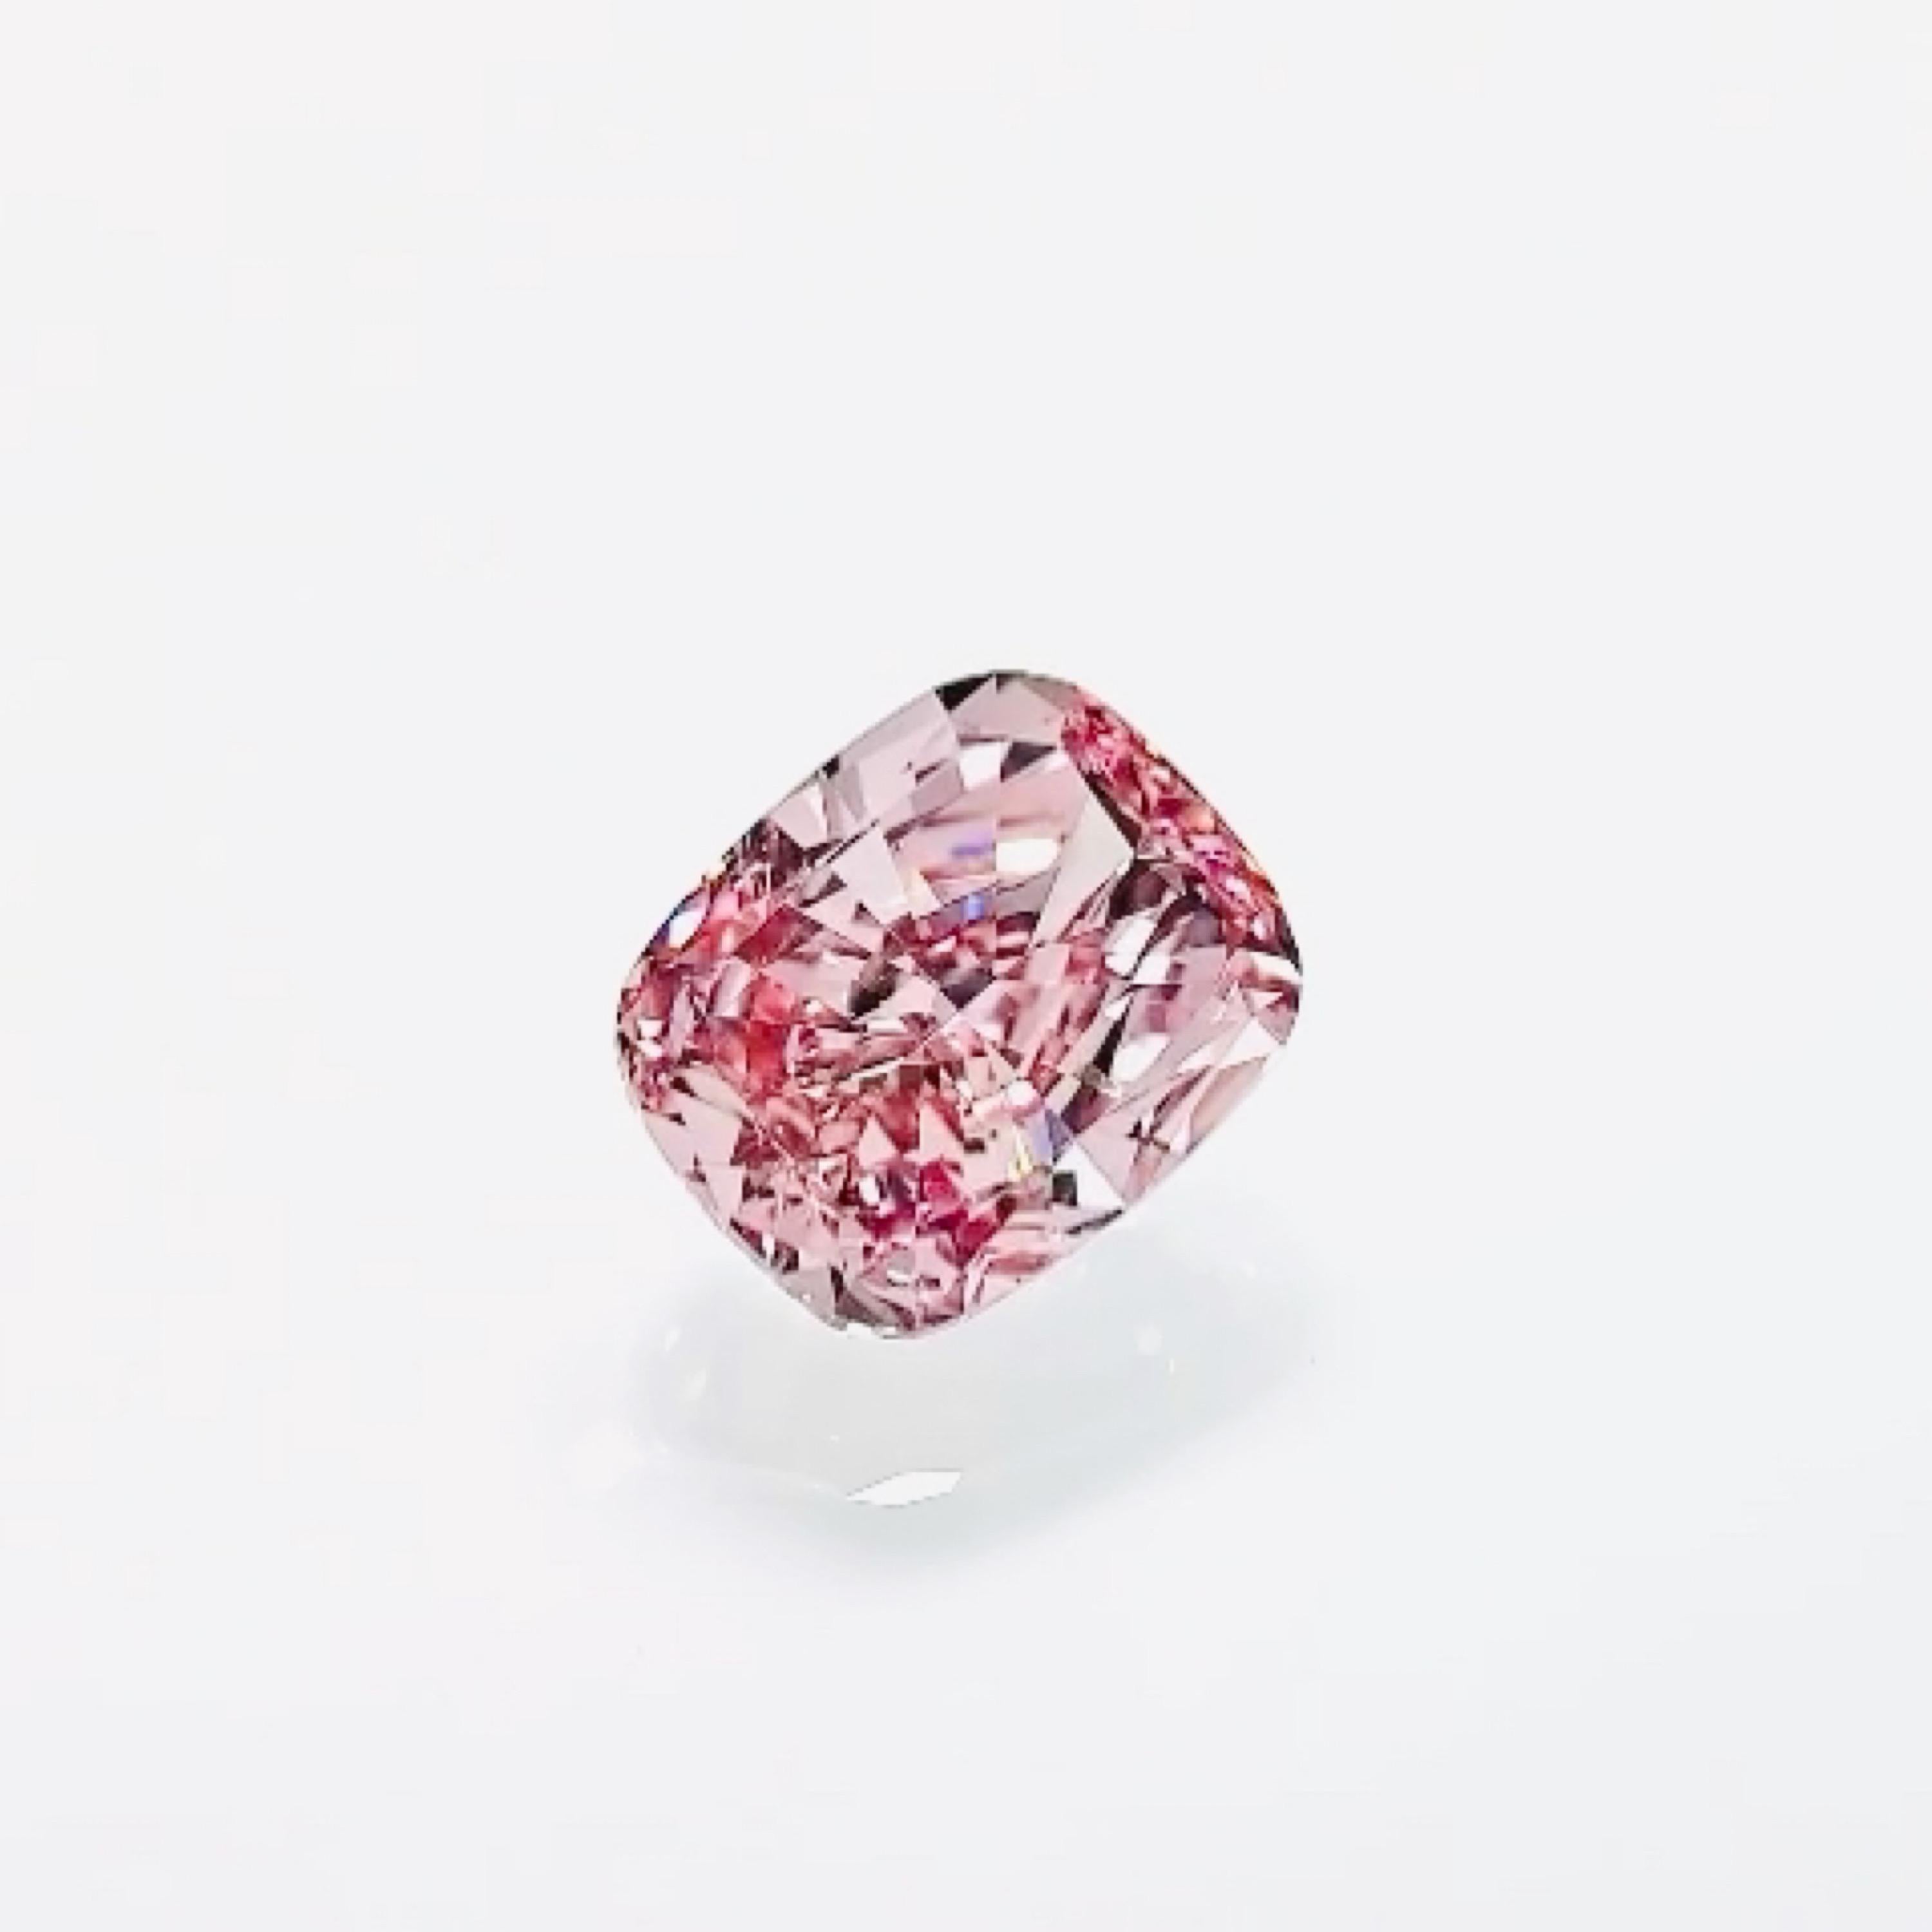 From Emilio Jewelry, a well known and respected wholesaler/dealer located on New York’s iconic Fifth Avenue, 
One of the rarest most spectacular Natural pink diamonds. Gia Certified 2.00+ carat natural fancy intense pink diamond with no overtone